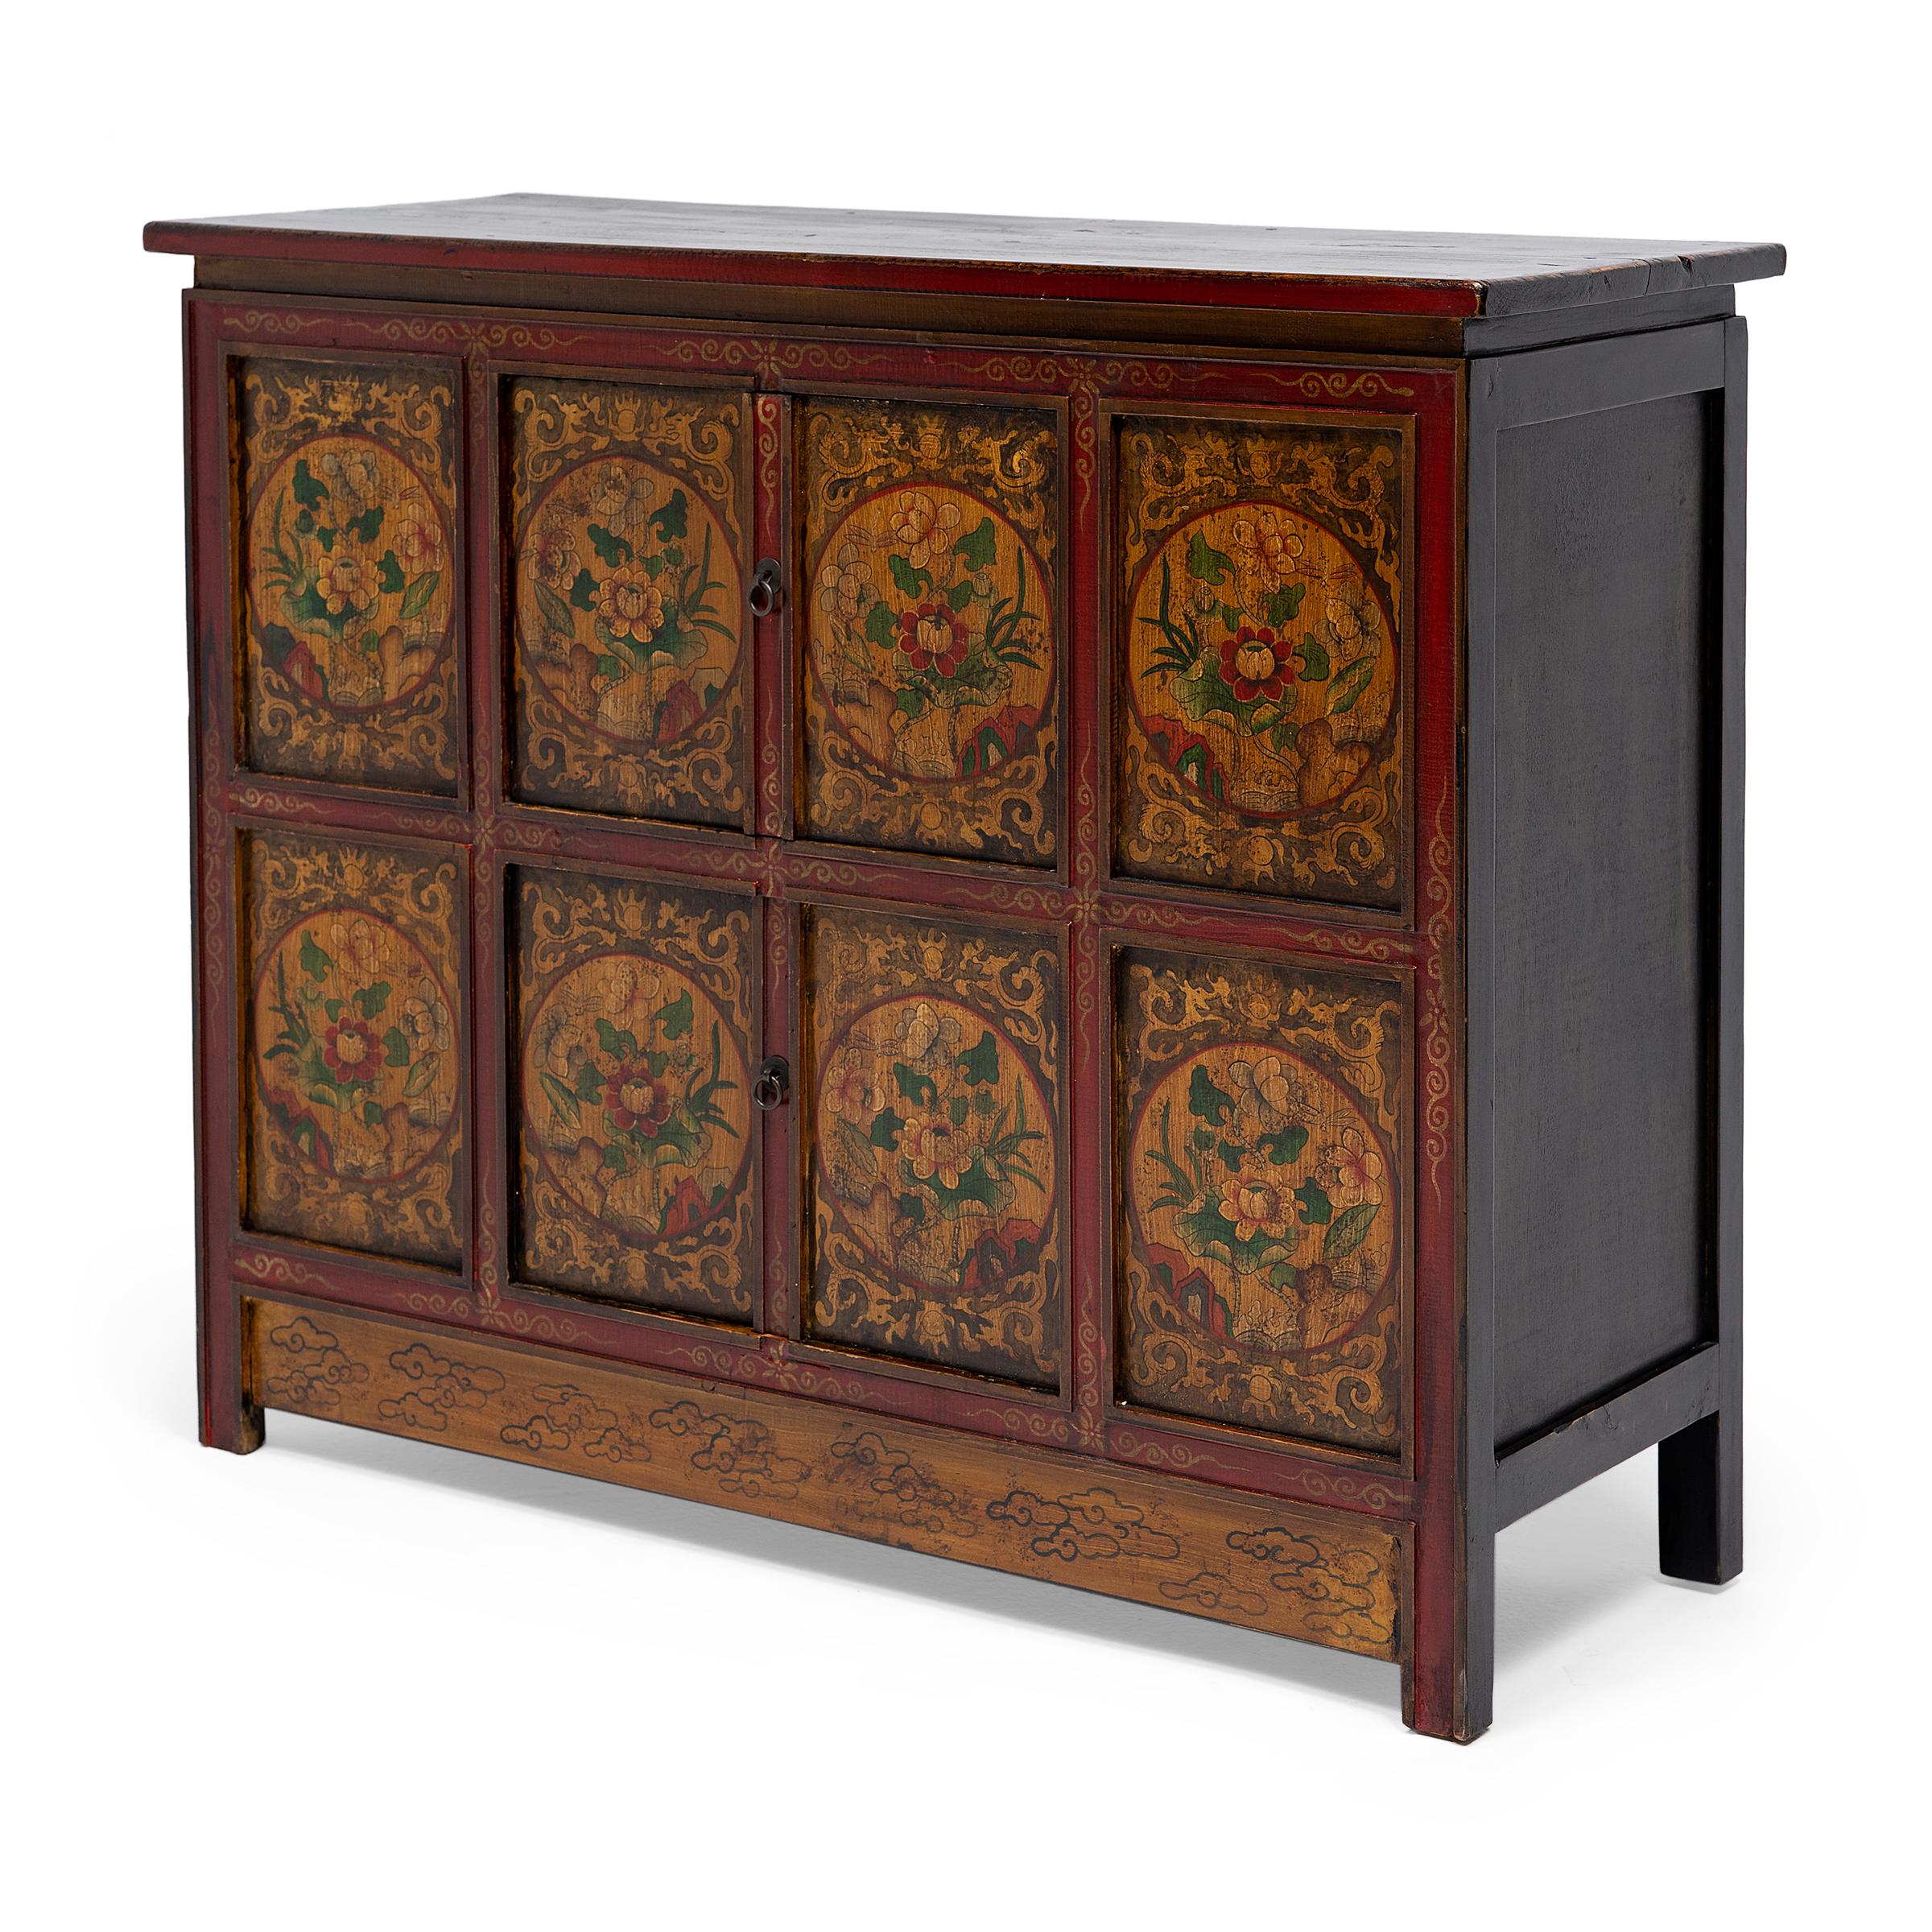 This late-19th century storage cabinet is intricately hand-painted in the Sino-Tibetan style with brightly pigmented gouache paints in a palette of red, yellow, green, and black. The cabinet front is divided into eight inset panels, each painted